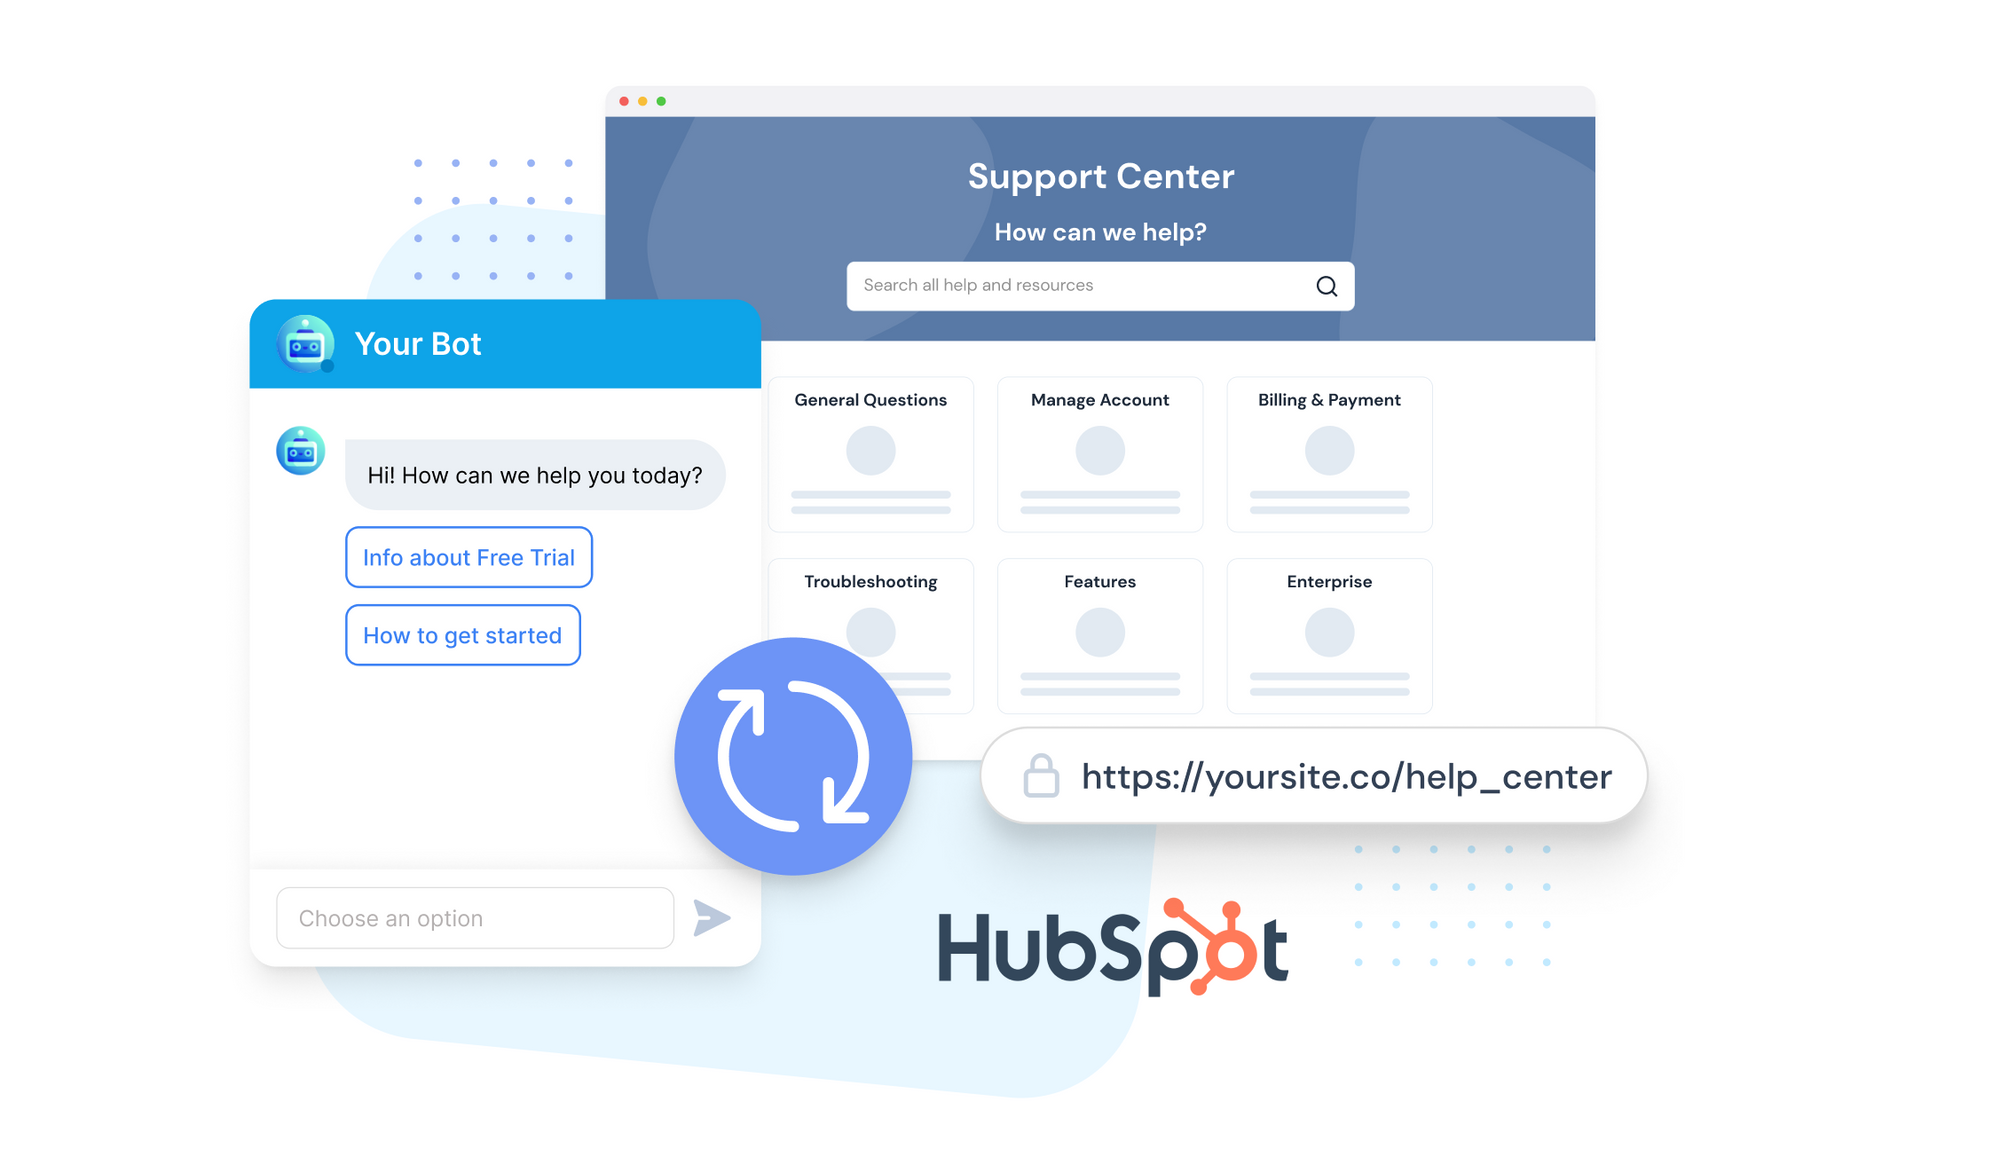 You can use the Punya HubSpot Importer to quickly transform your HubSpot Knowledge Base into a Customer Support AI in minutes.